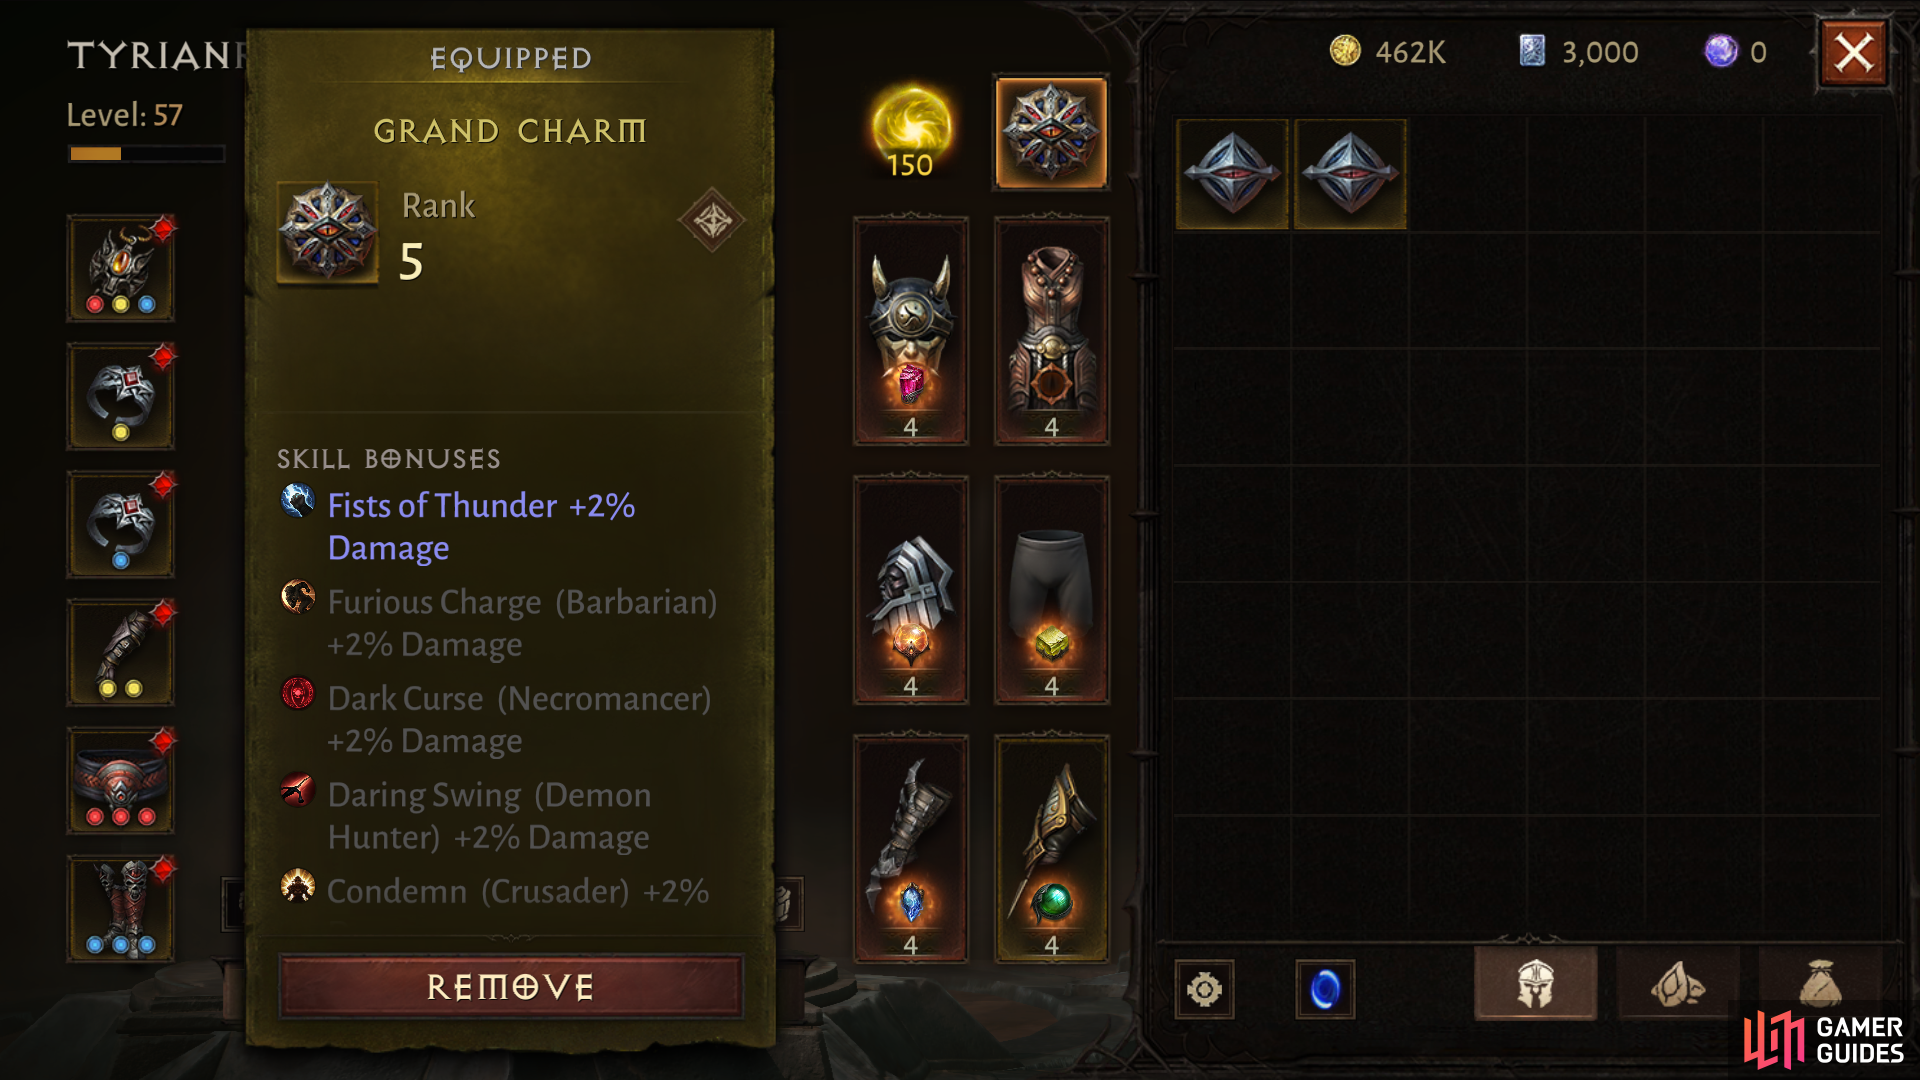 Charms can be upgraded to hold up to five skills with varying damage bonuses.